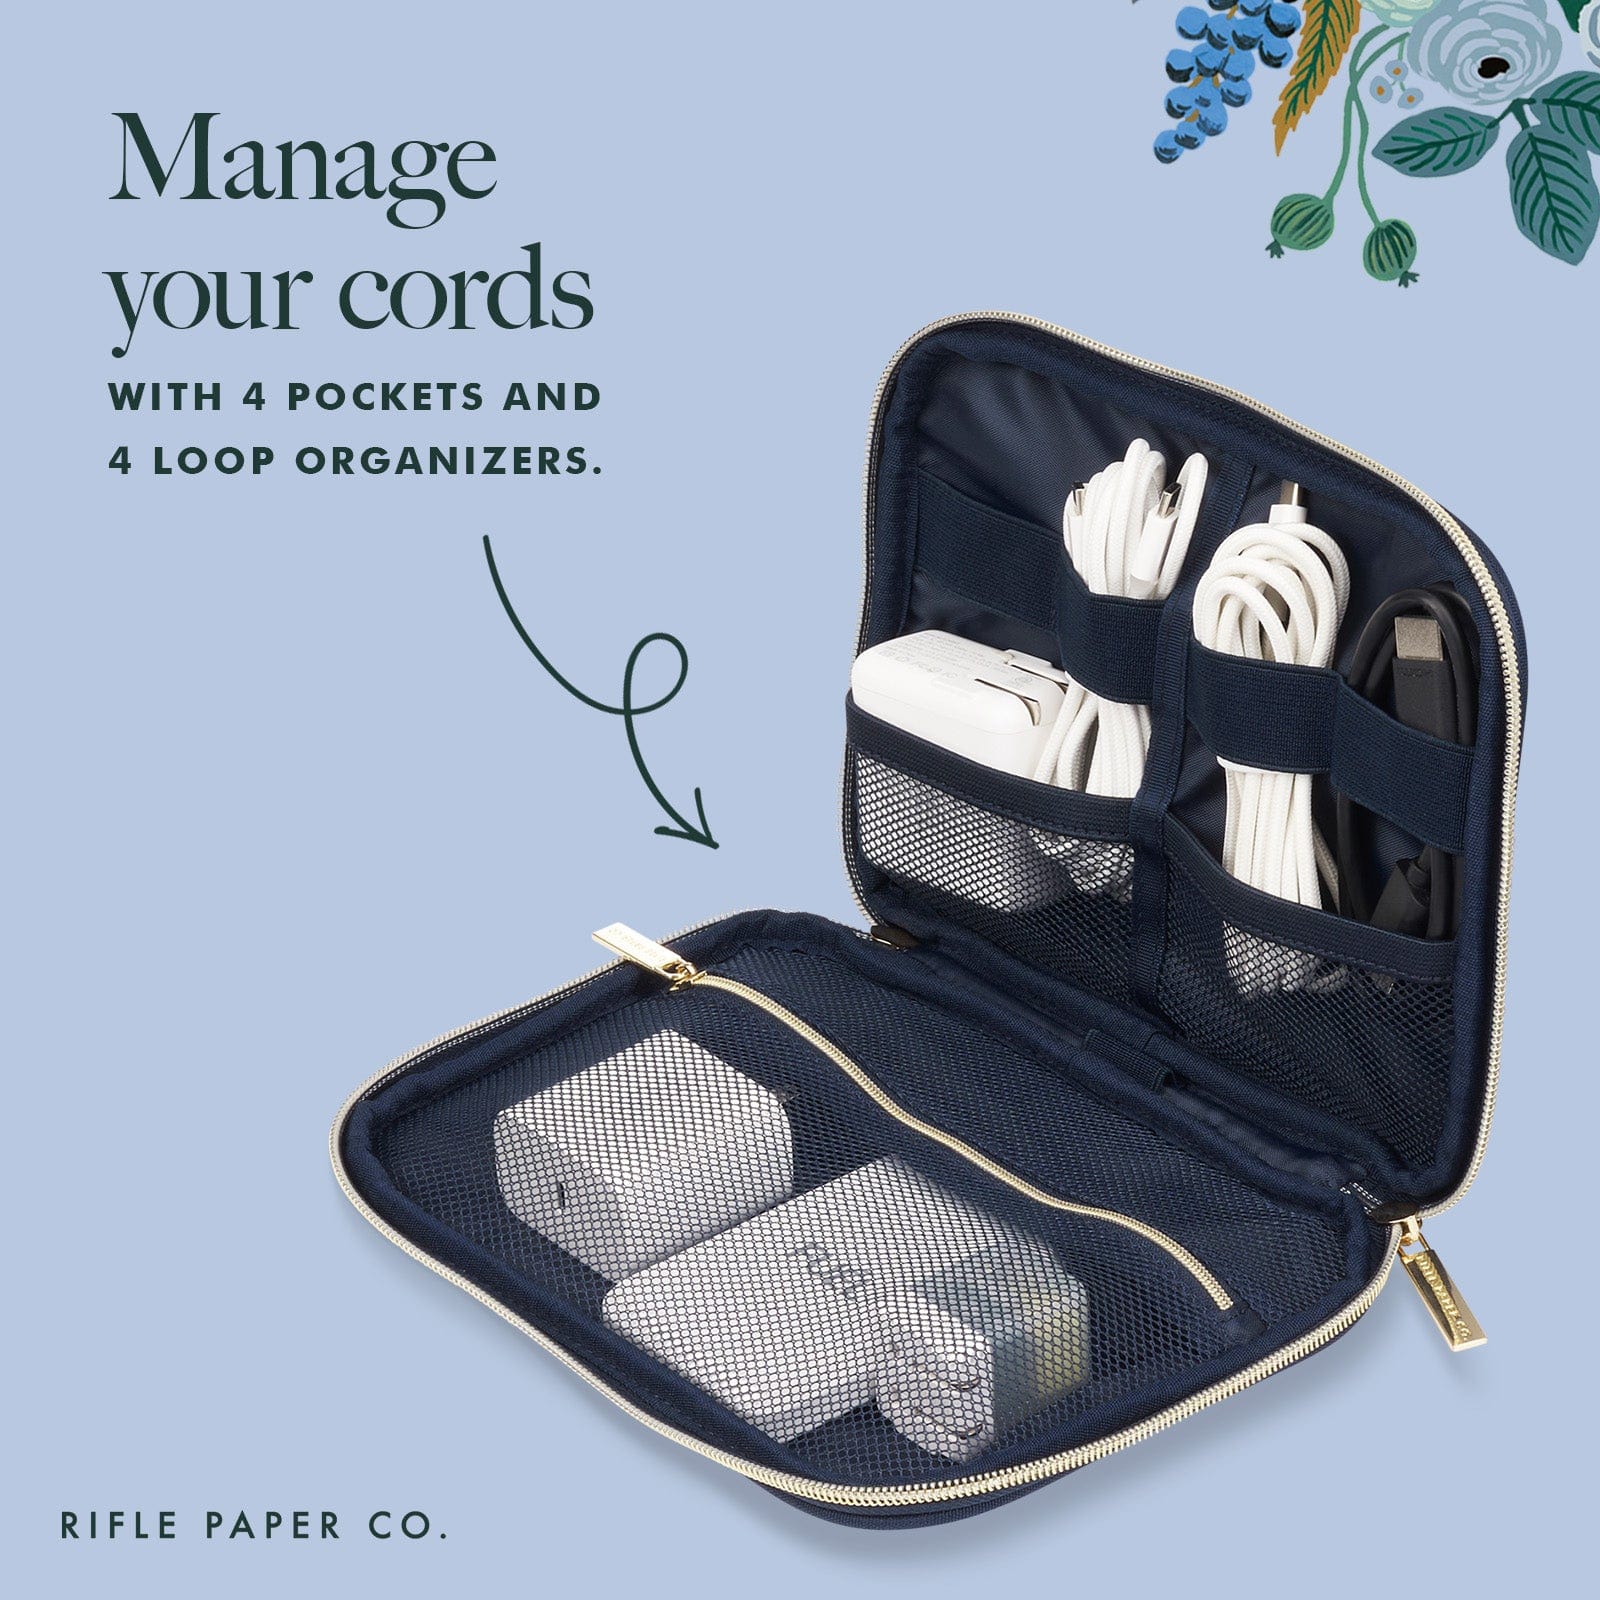 MANAGE YOUR CORDS WITH 4 POCKETS AND 4 LOOP ORGANIZERS. 